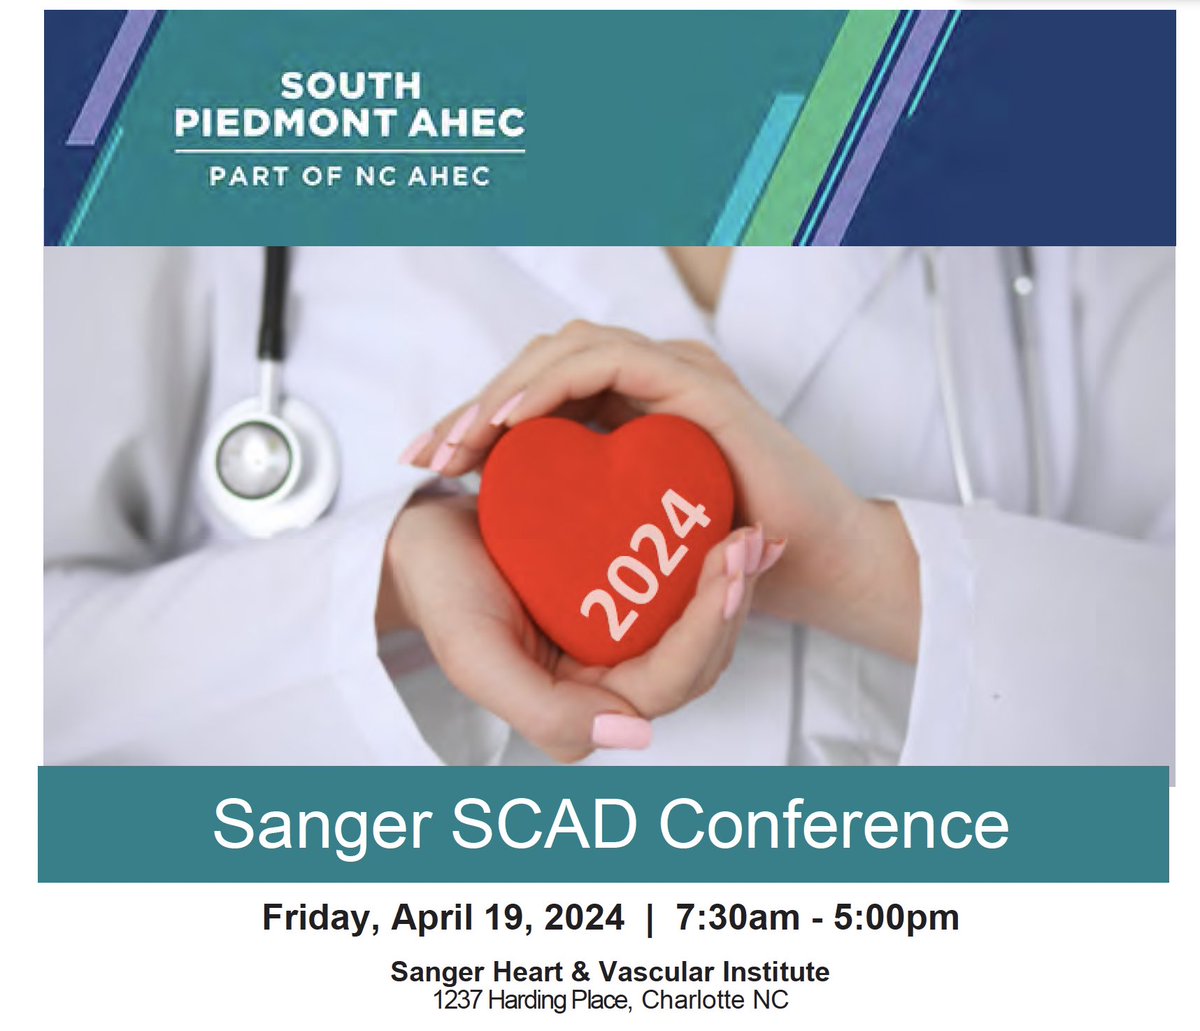 I'll be in Charlotte NC this week for the 2024 Sanger SCAD Conference 
- Drop by if interested
southpiedmontahec.org/event/72636